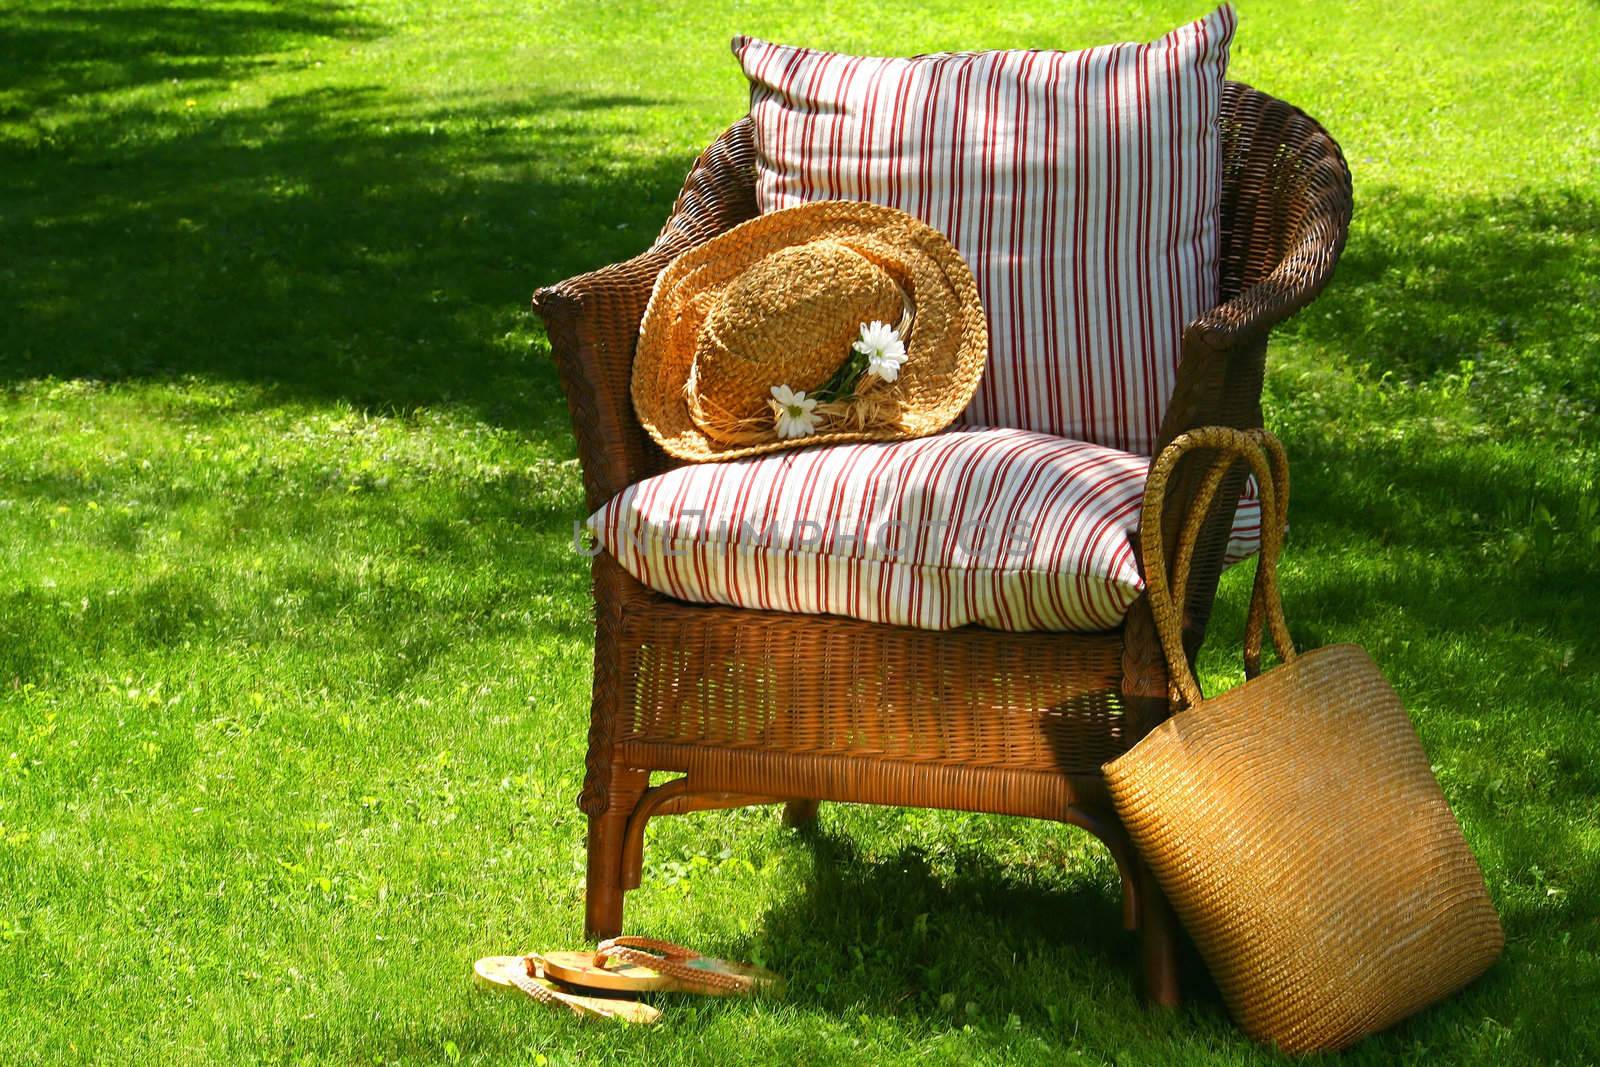 Straw hat and old wicker chair by Sandralise